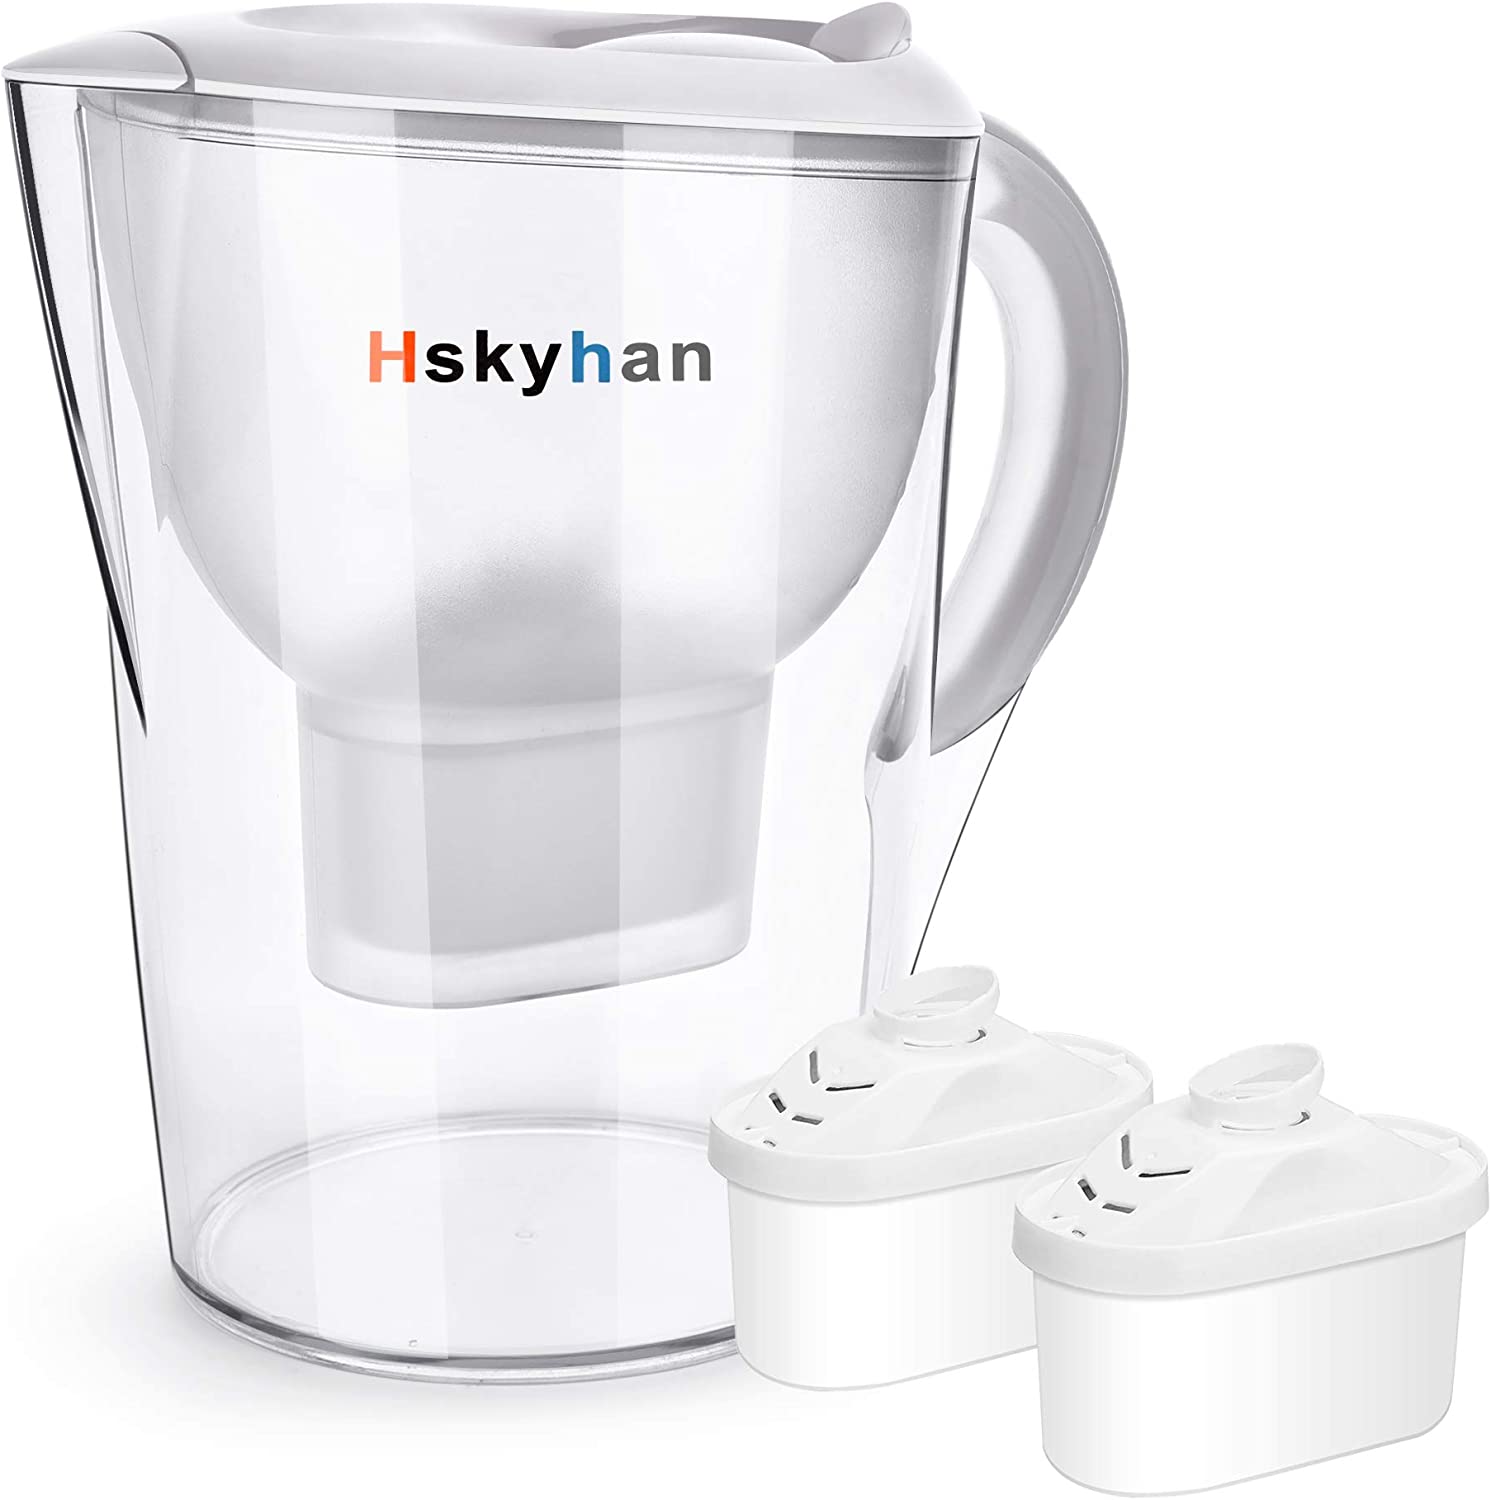 Hskyhan Water Filter Pitcher Alkaline – 3.5 Liters Improve PH, 2 Filters Included, BPA Free, 7 Stage Filteration System to Purifier, White